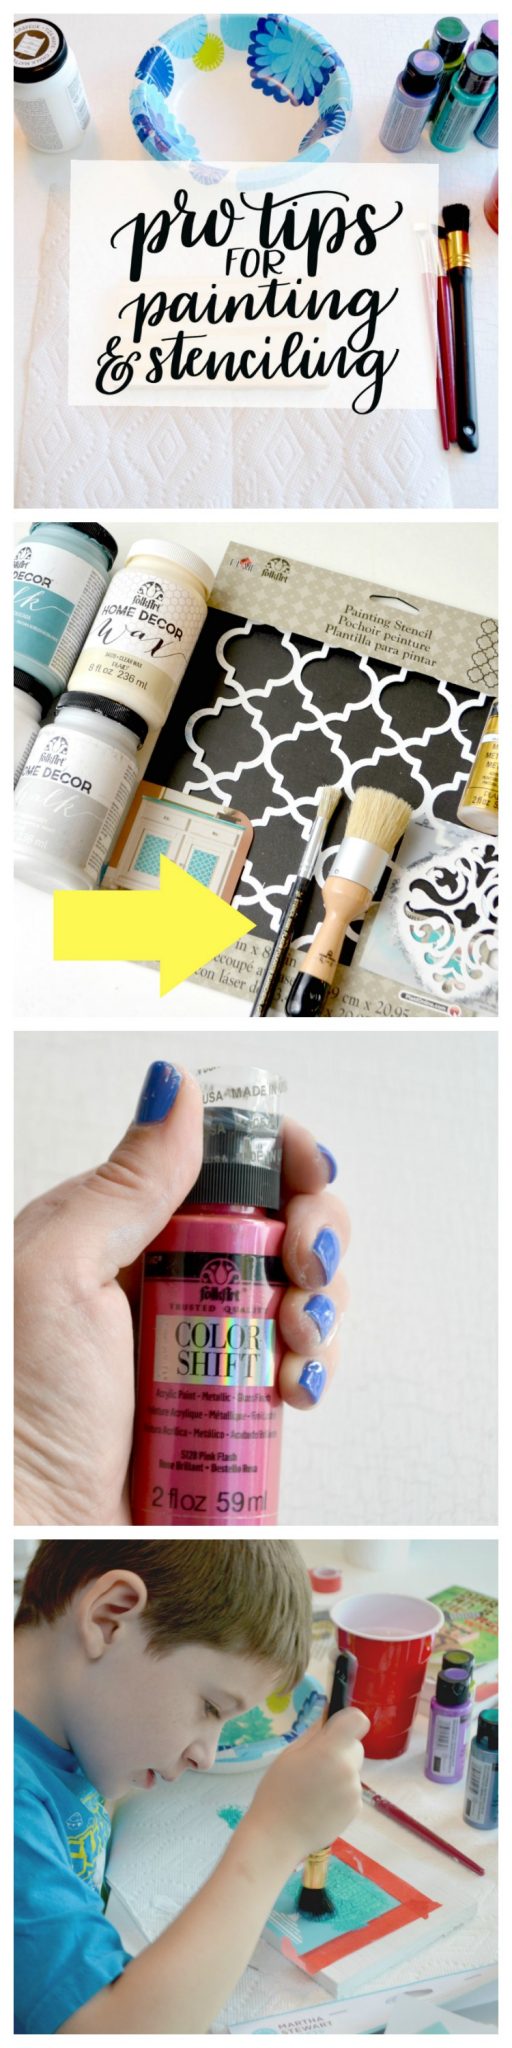 Pro Tips for Painting & Stenciling